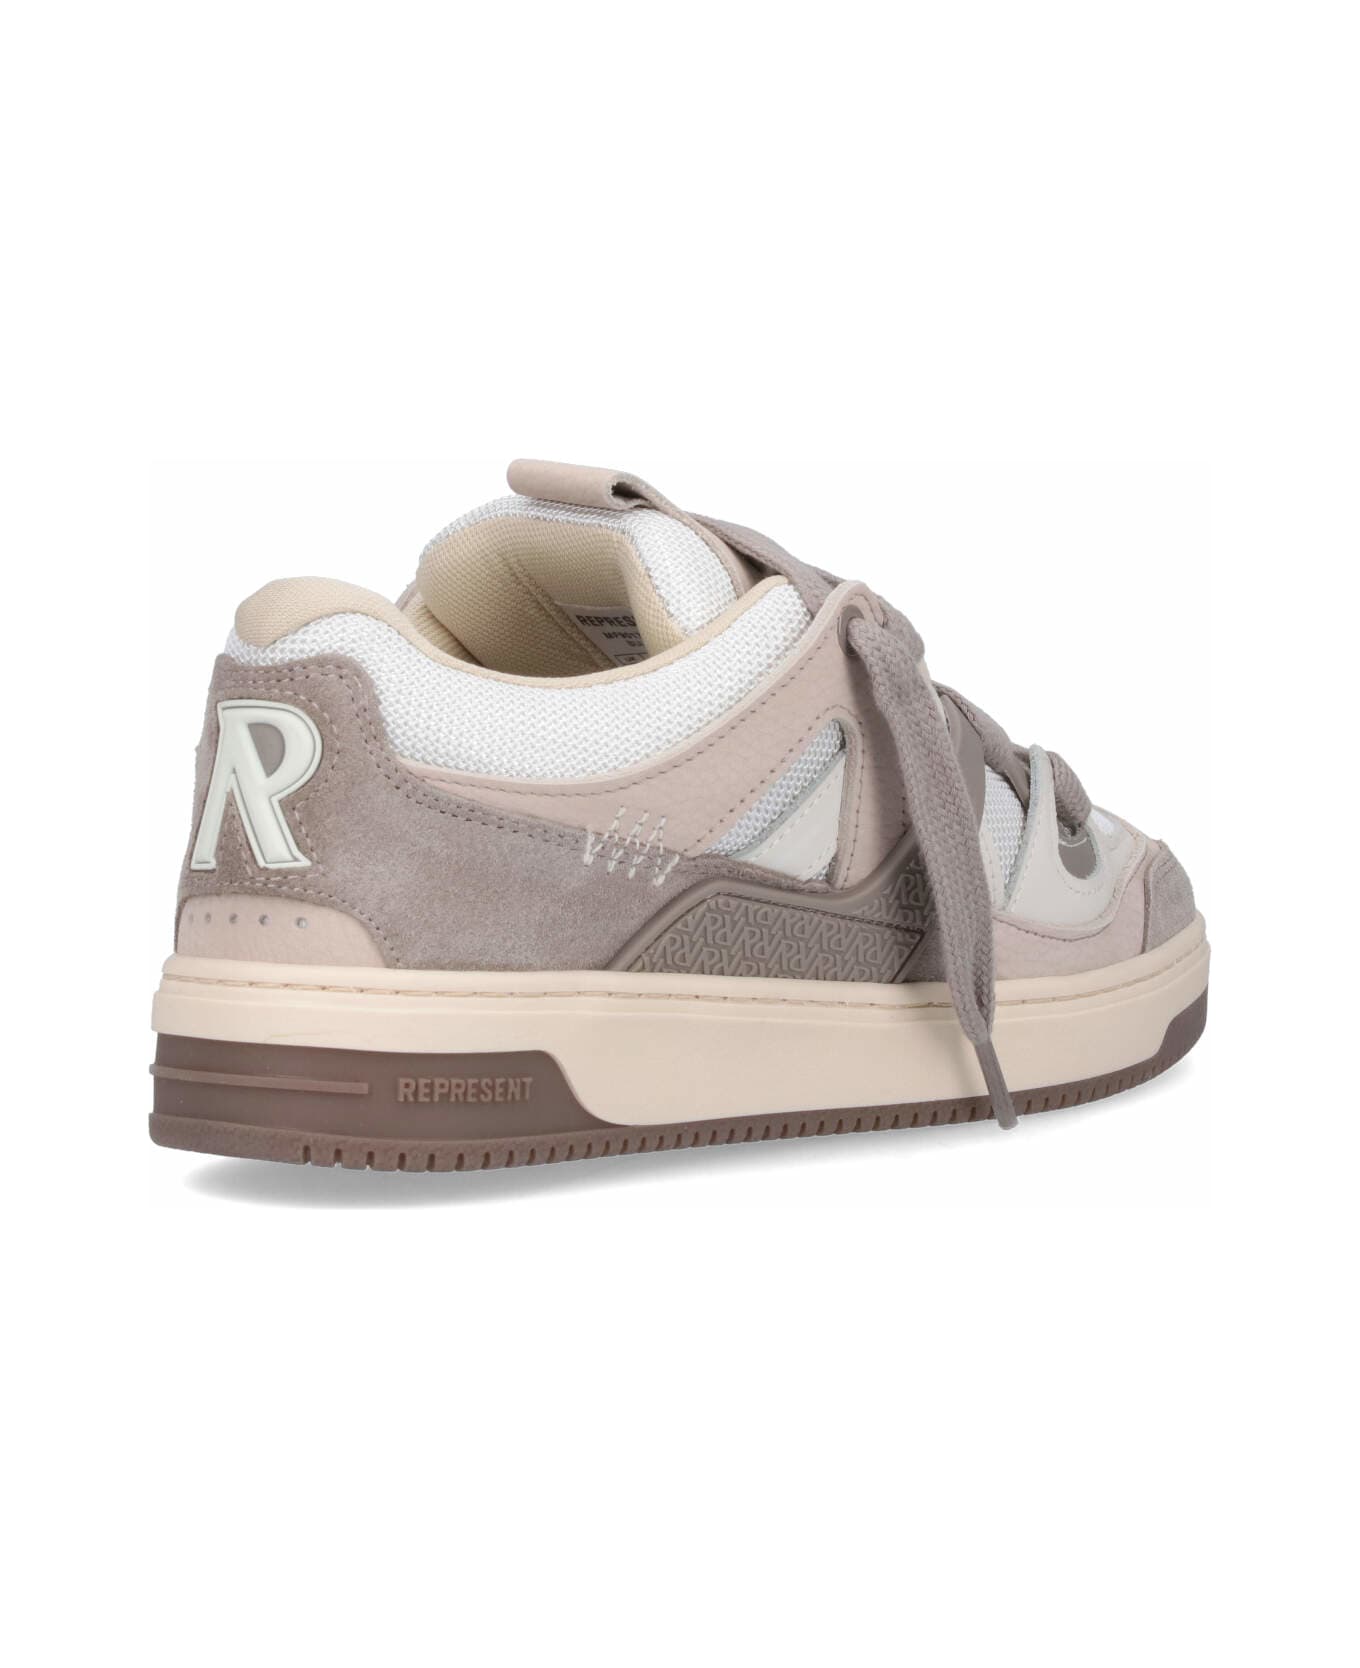 REPRESENT 'bully' Sneakers - Taupe